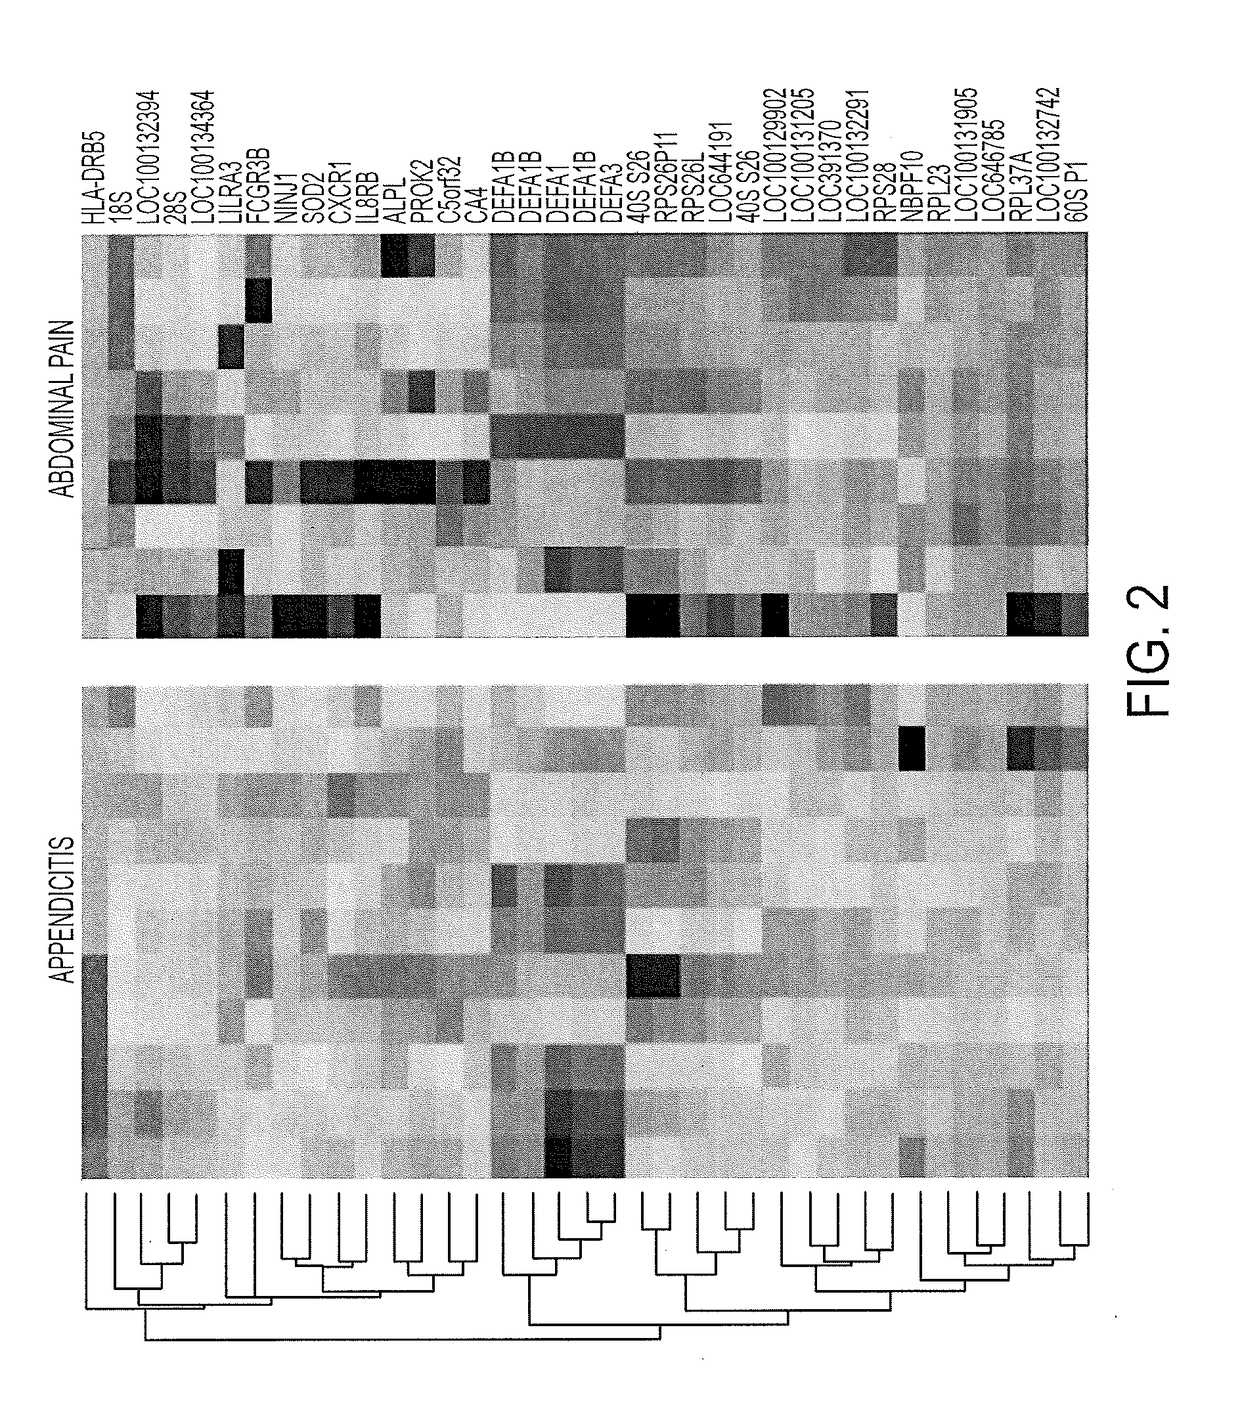 Blood biomarkers for appendicitis and diagnostics methods using biomarkers